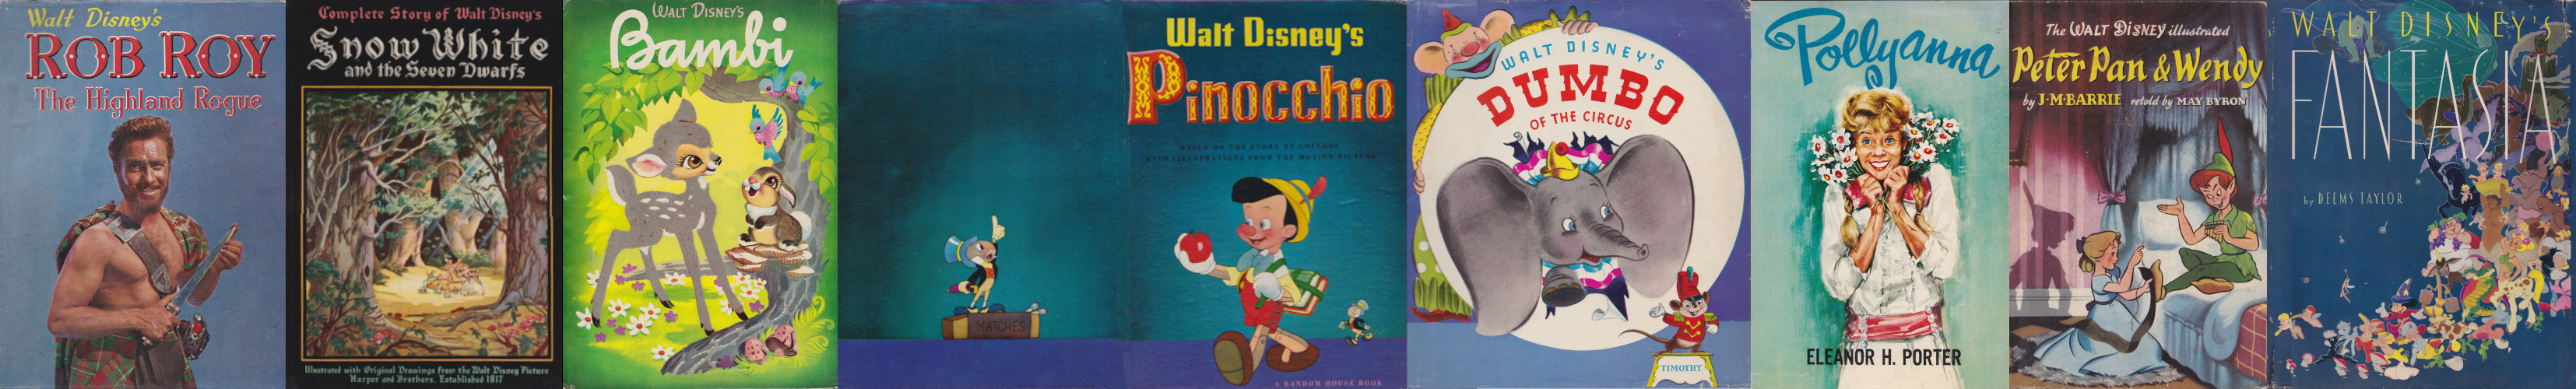 Disney PhotoPlay Editions Hardcover with Dustjacket